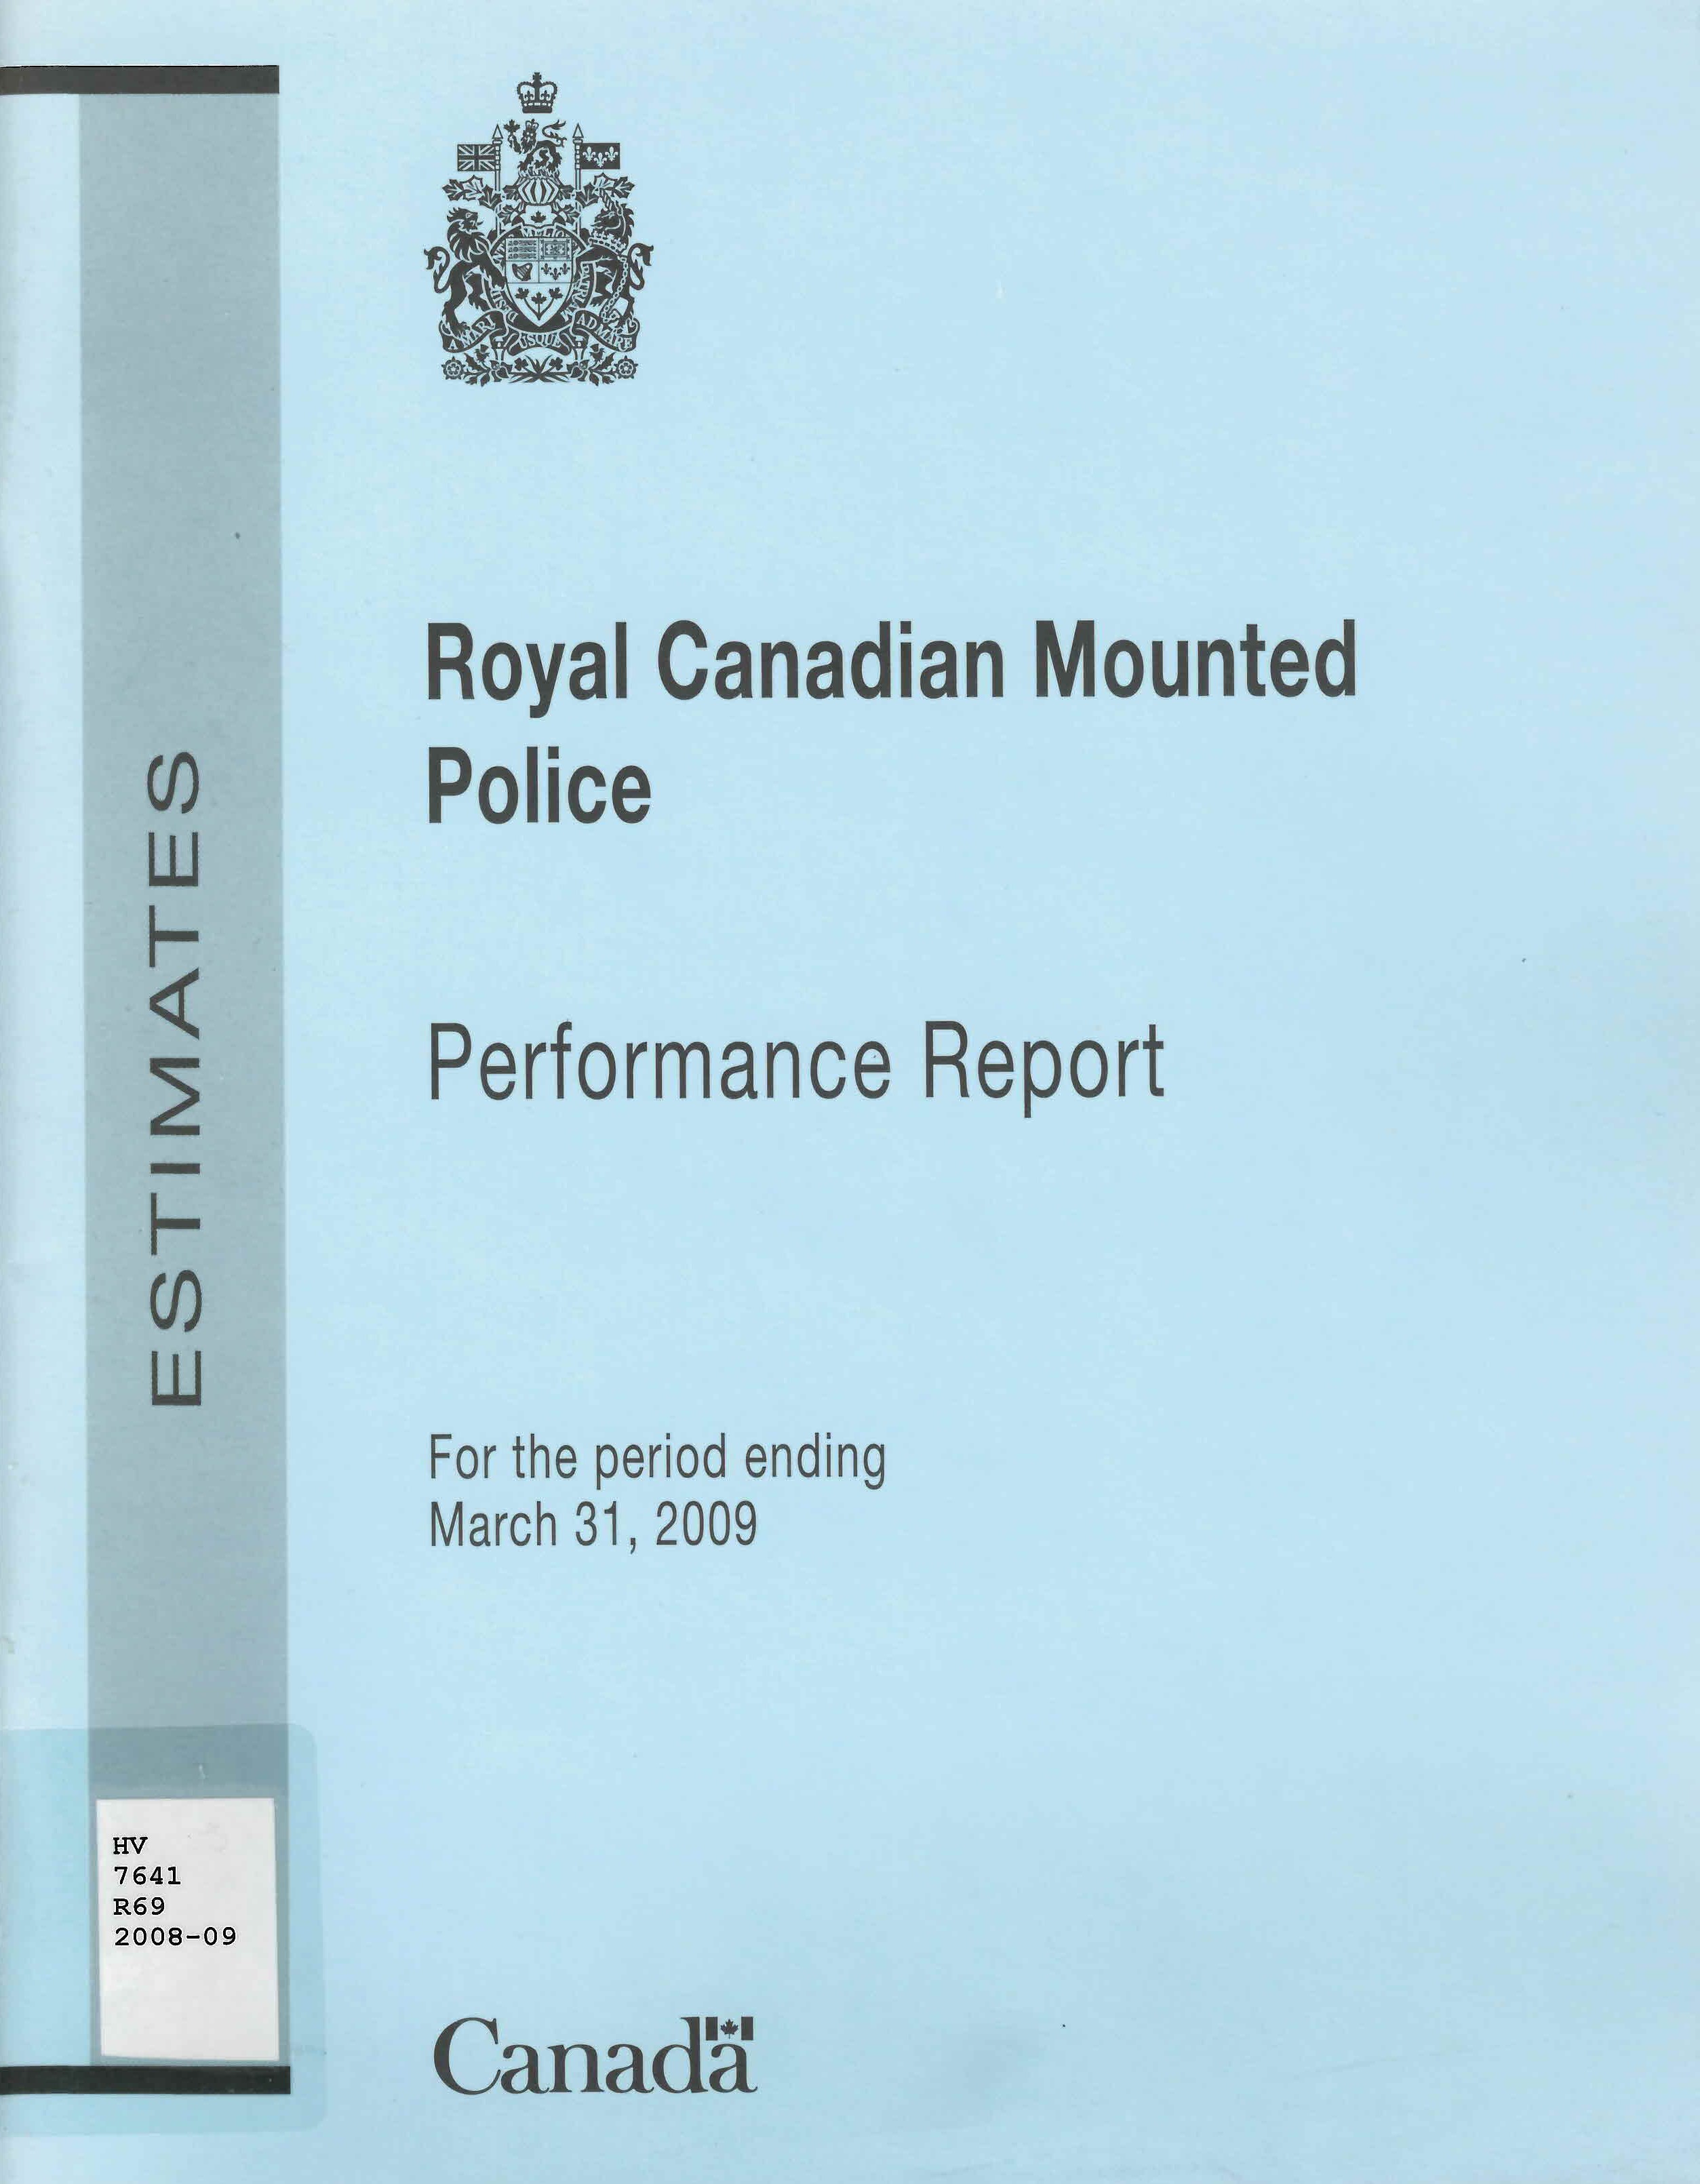 Royal Canadian Mounted Police : departmental performance report